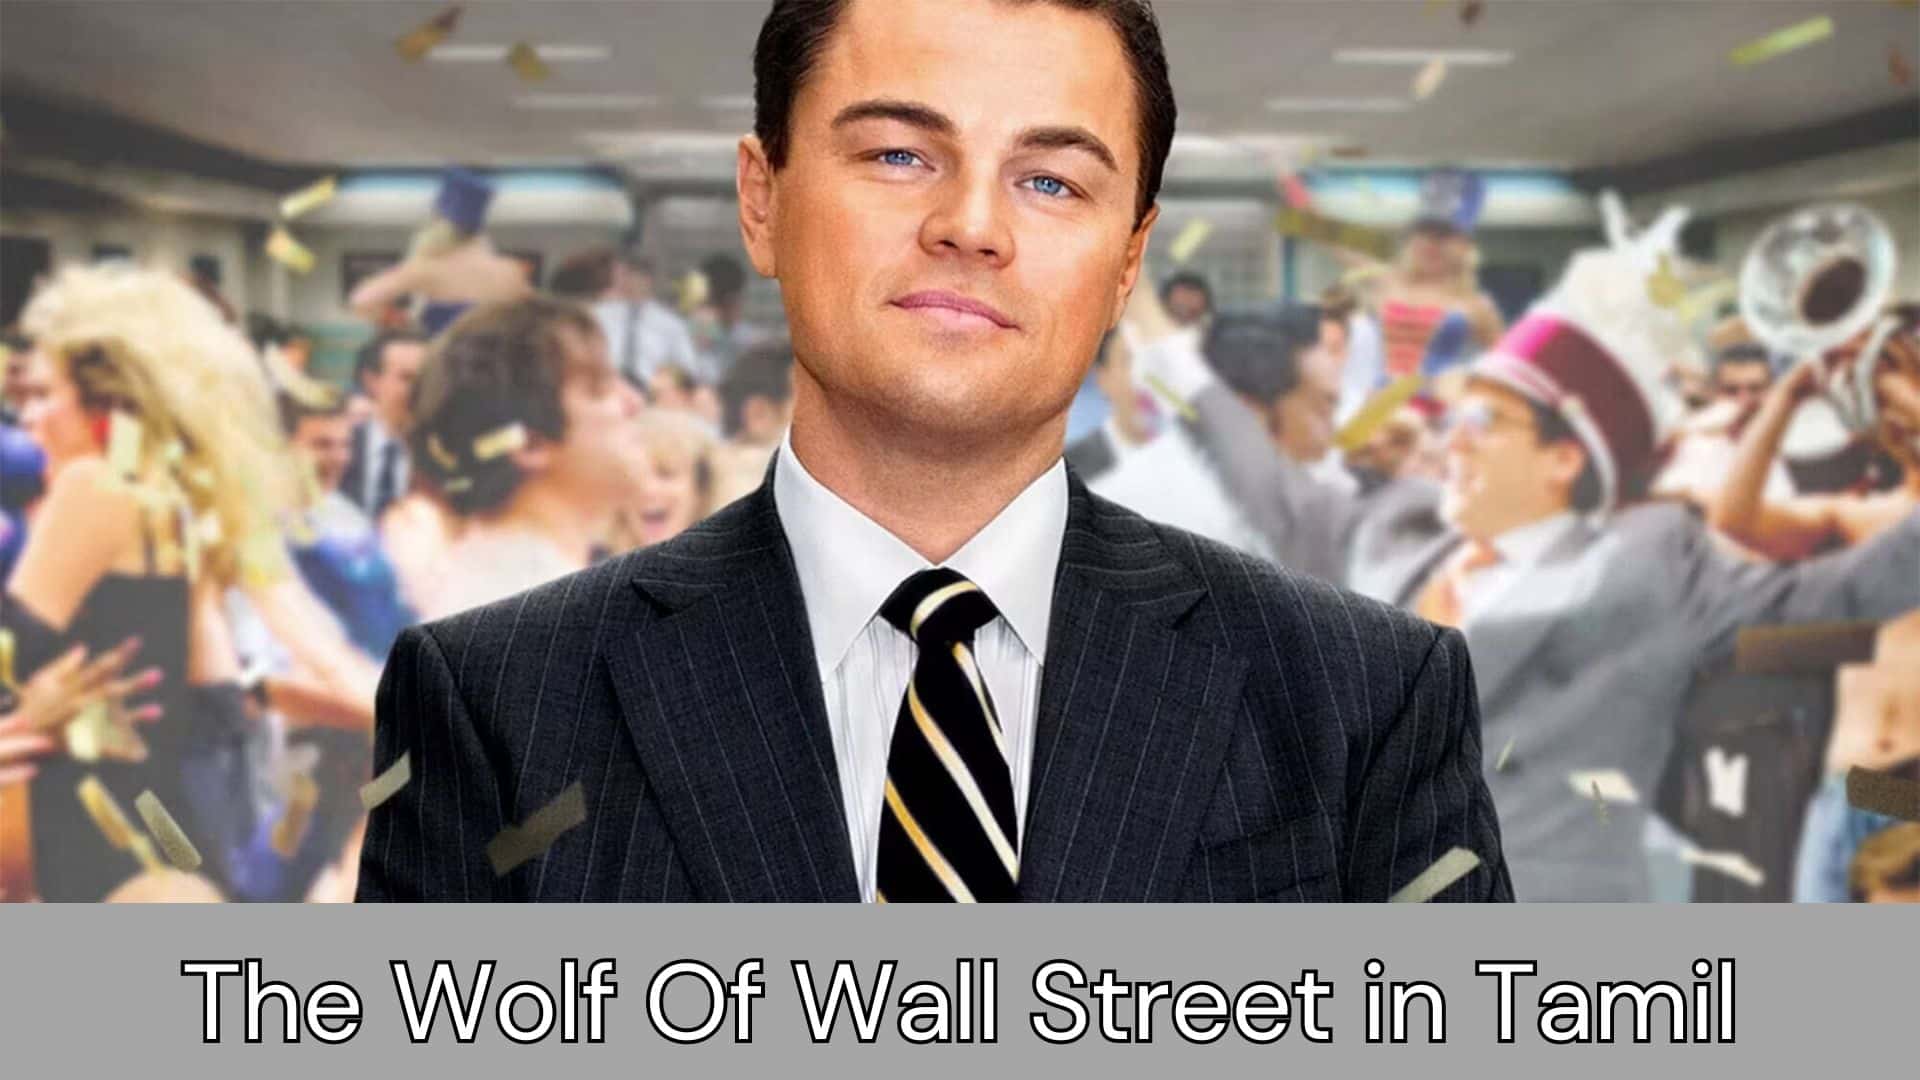 The Wolf Of Wall Street tamil dubbed telegram link 1080p, 720p, 480p